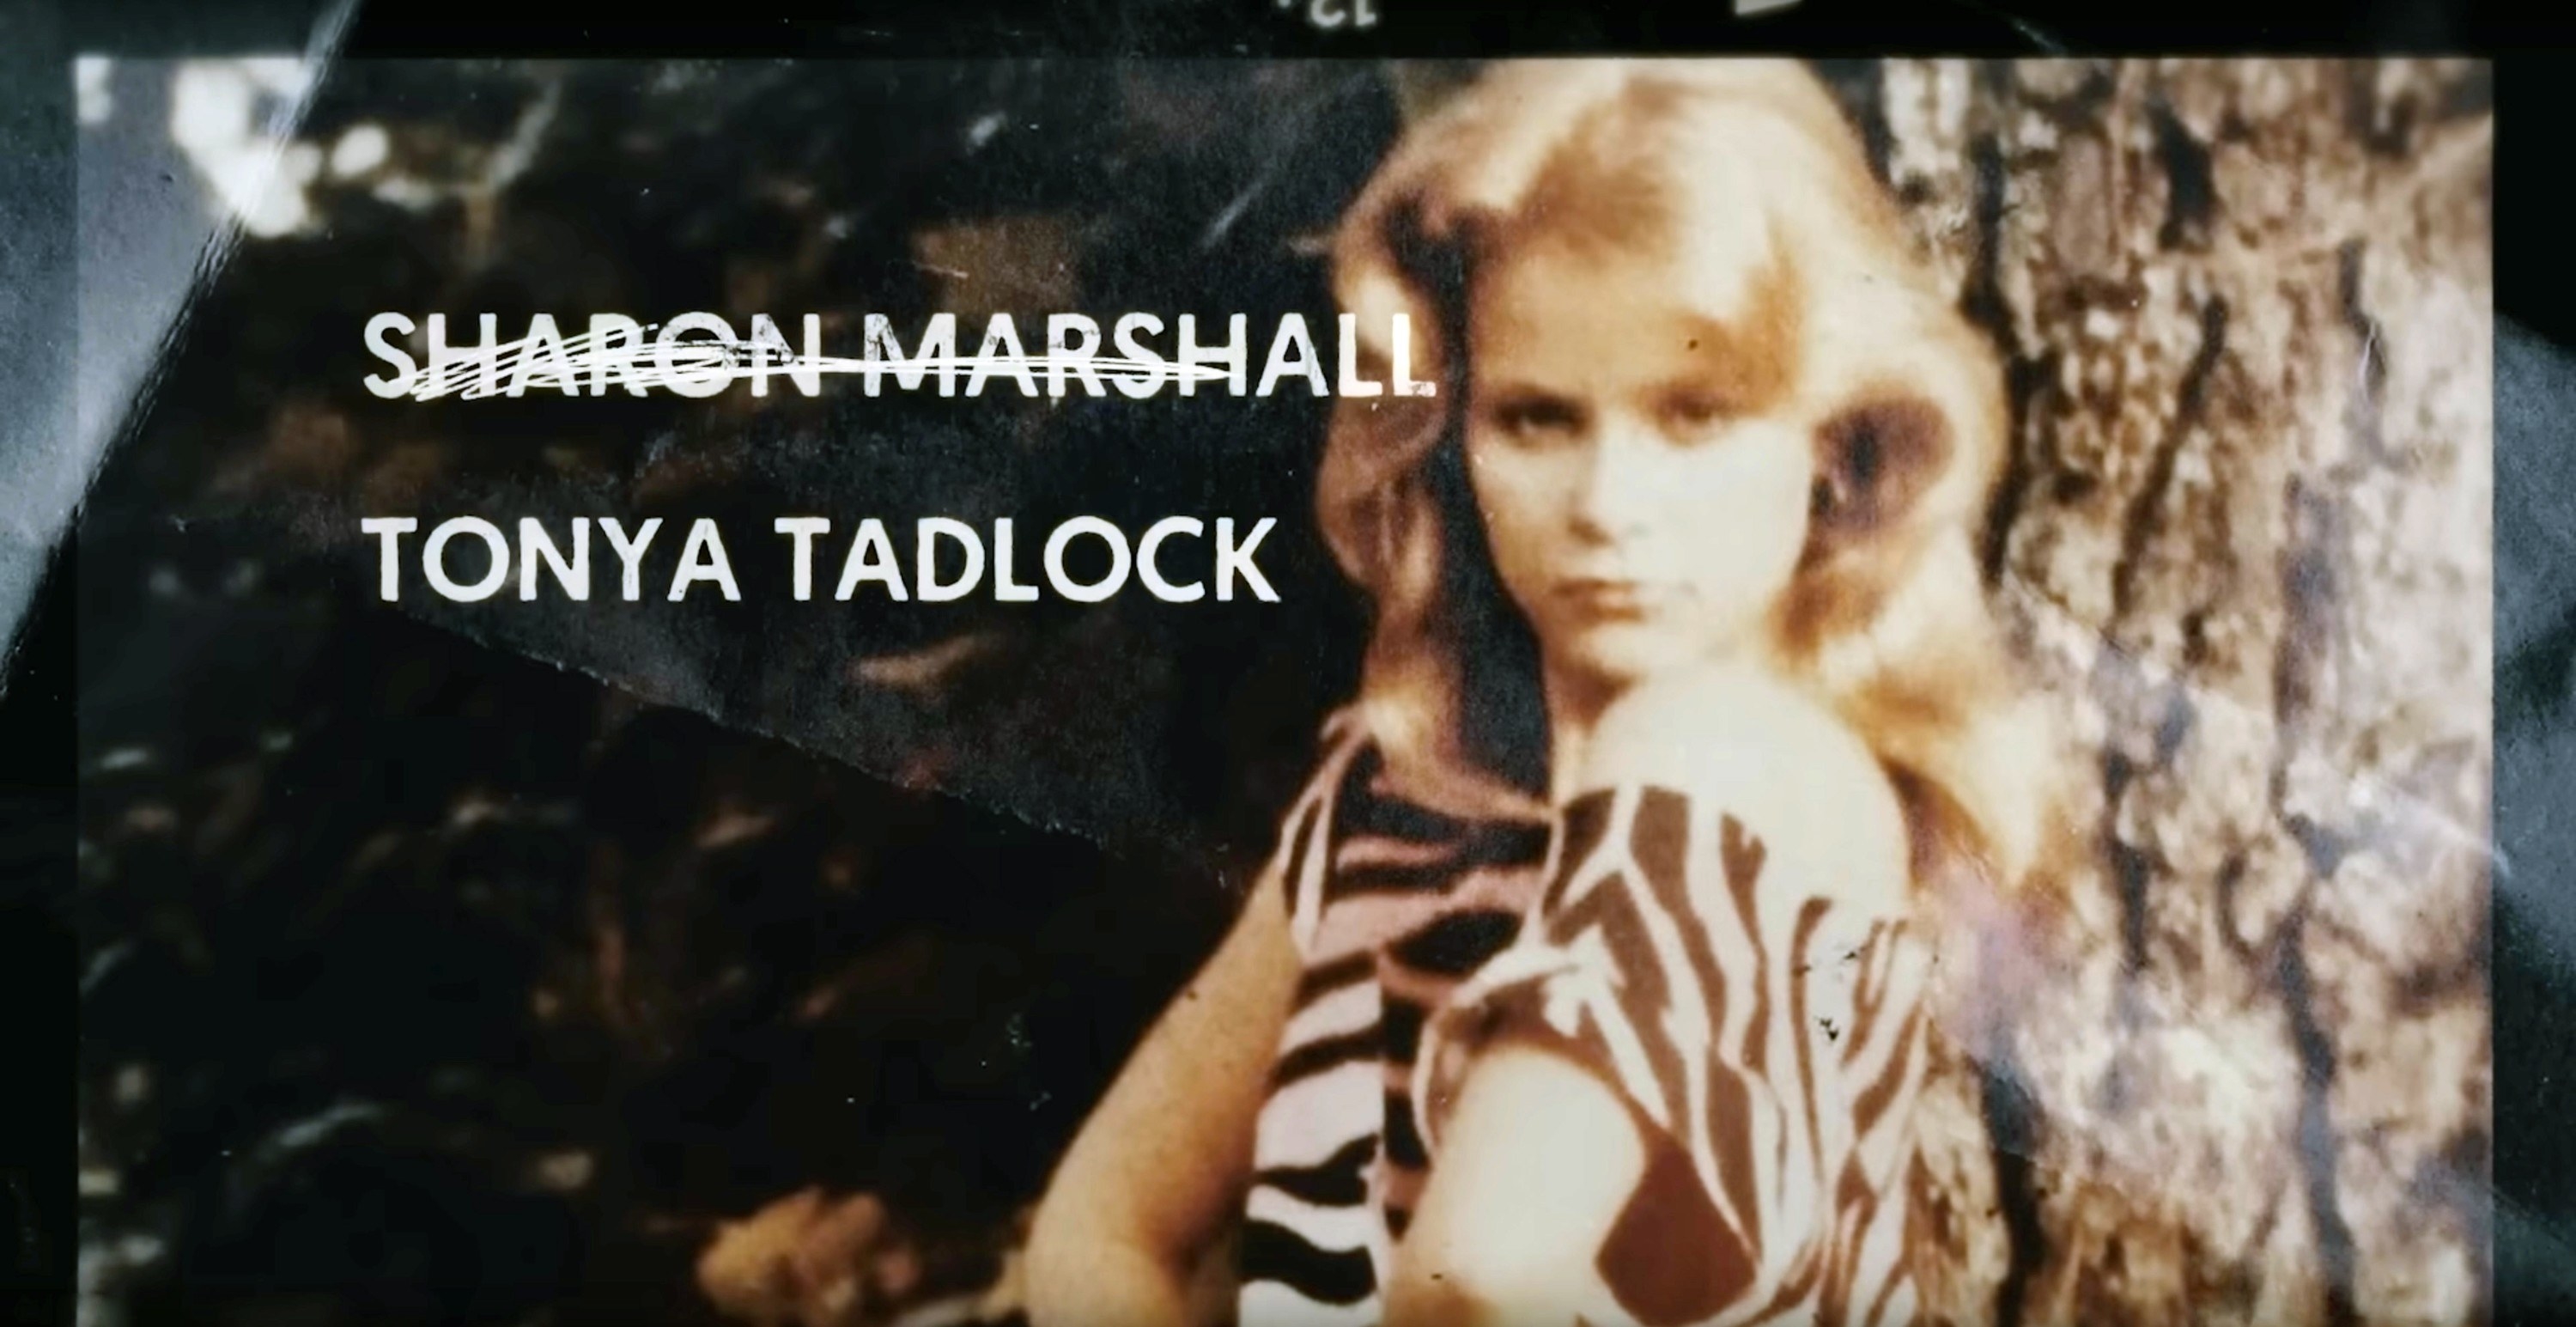 An old photo of a woman, with the name Sharon Marshall crossed out and replaced by the name Tonya Tadlock